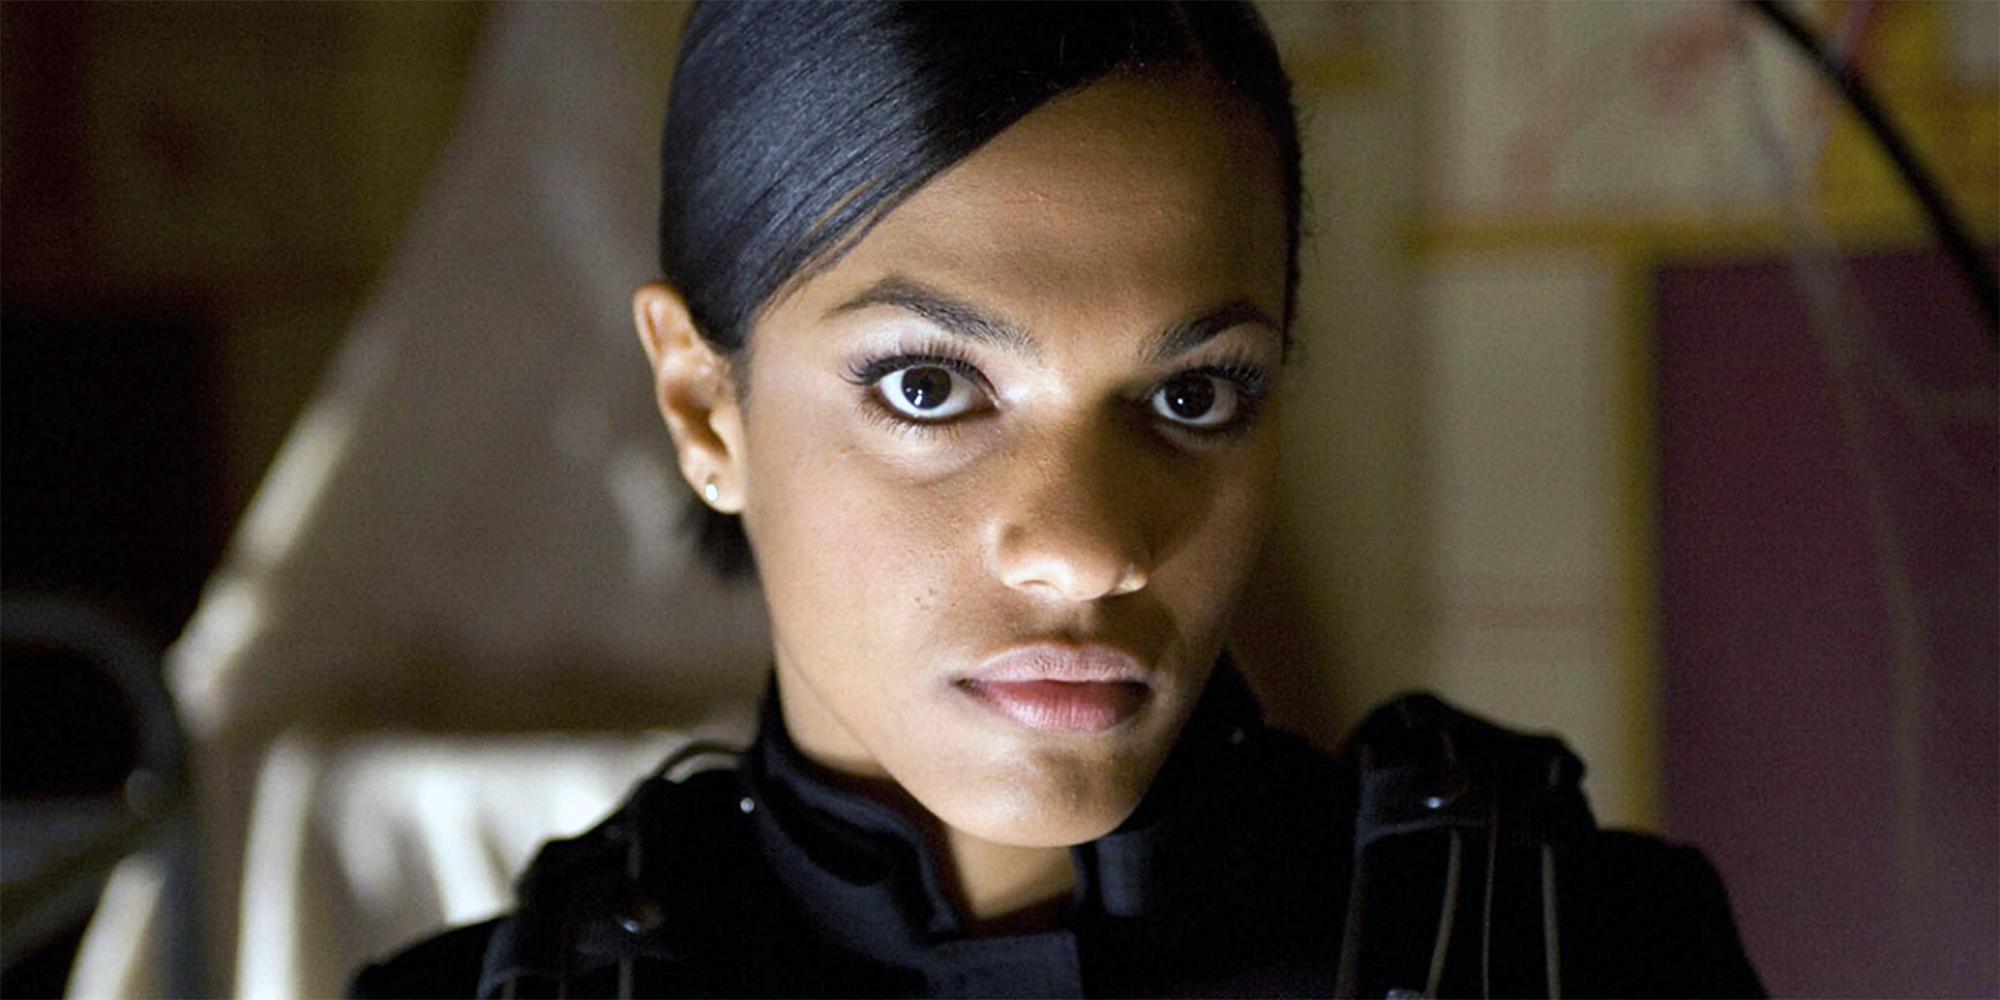 Martha Jones' (Freema Agyeman) pining after Doctor Ten ultimately led to her choosing her own path